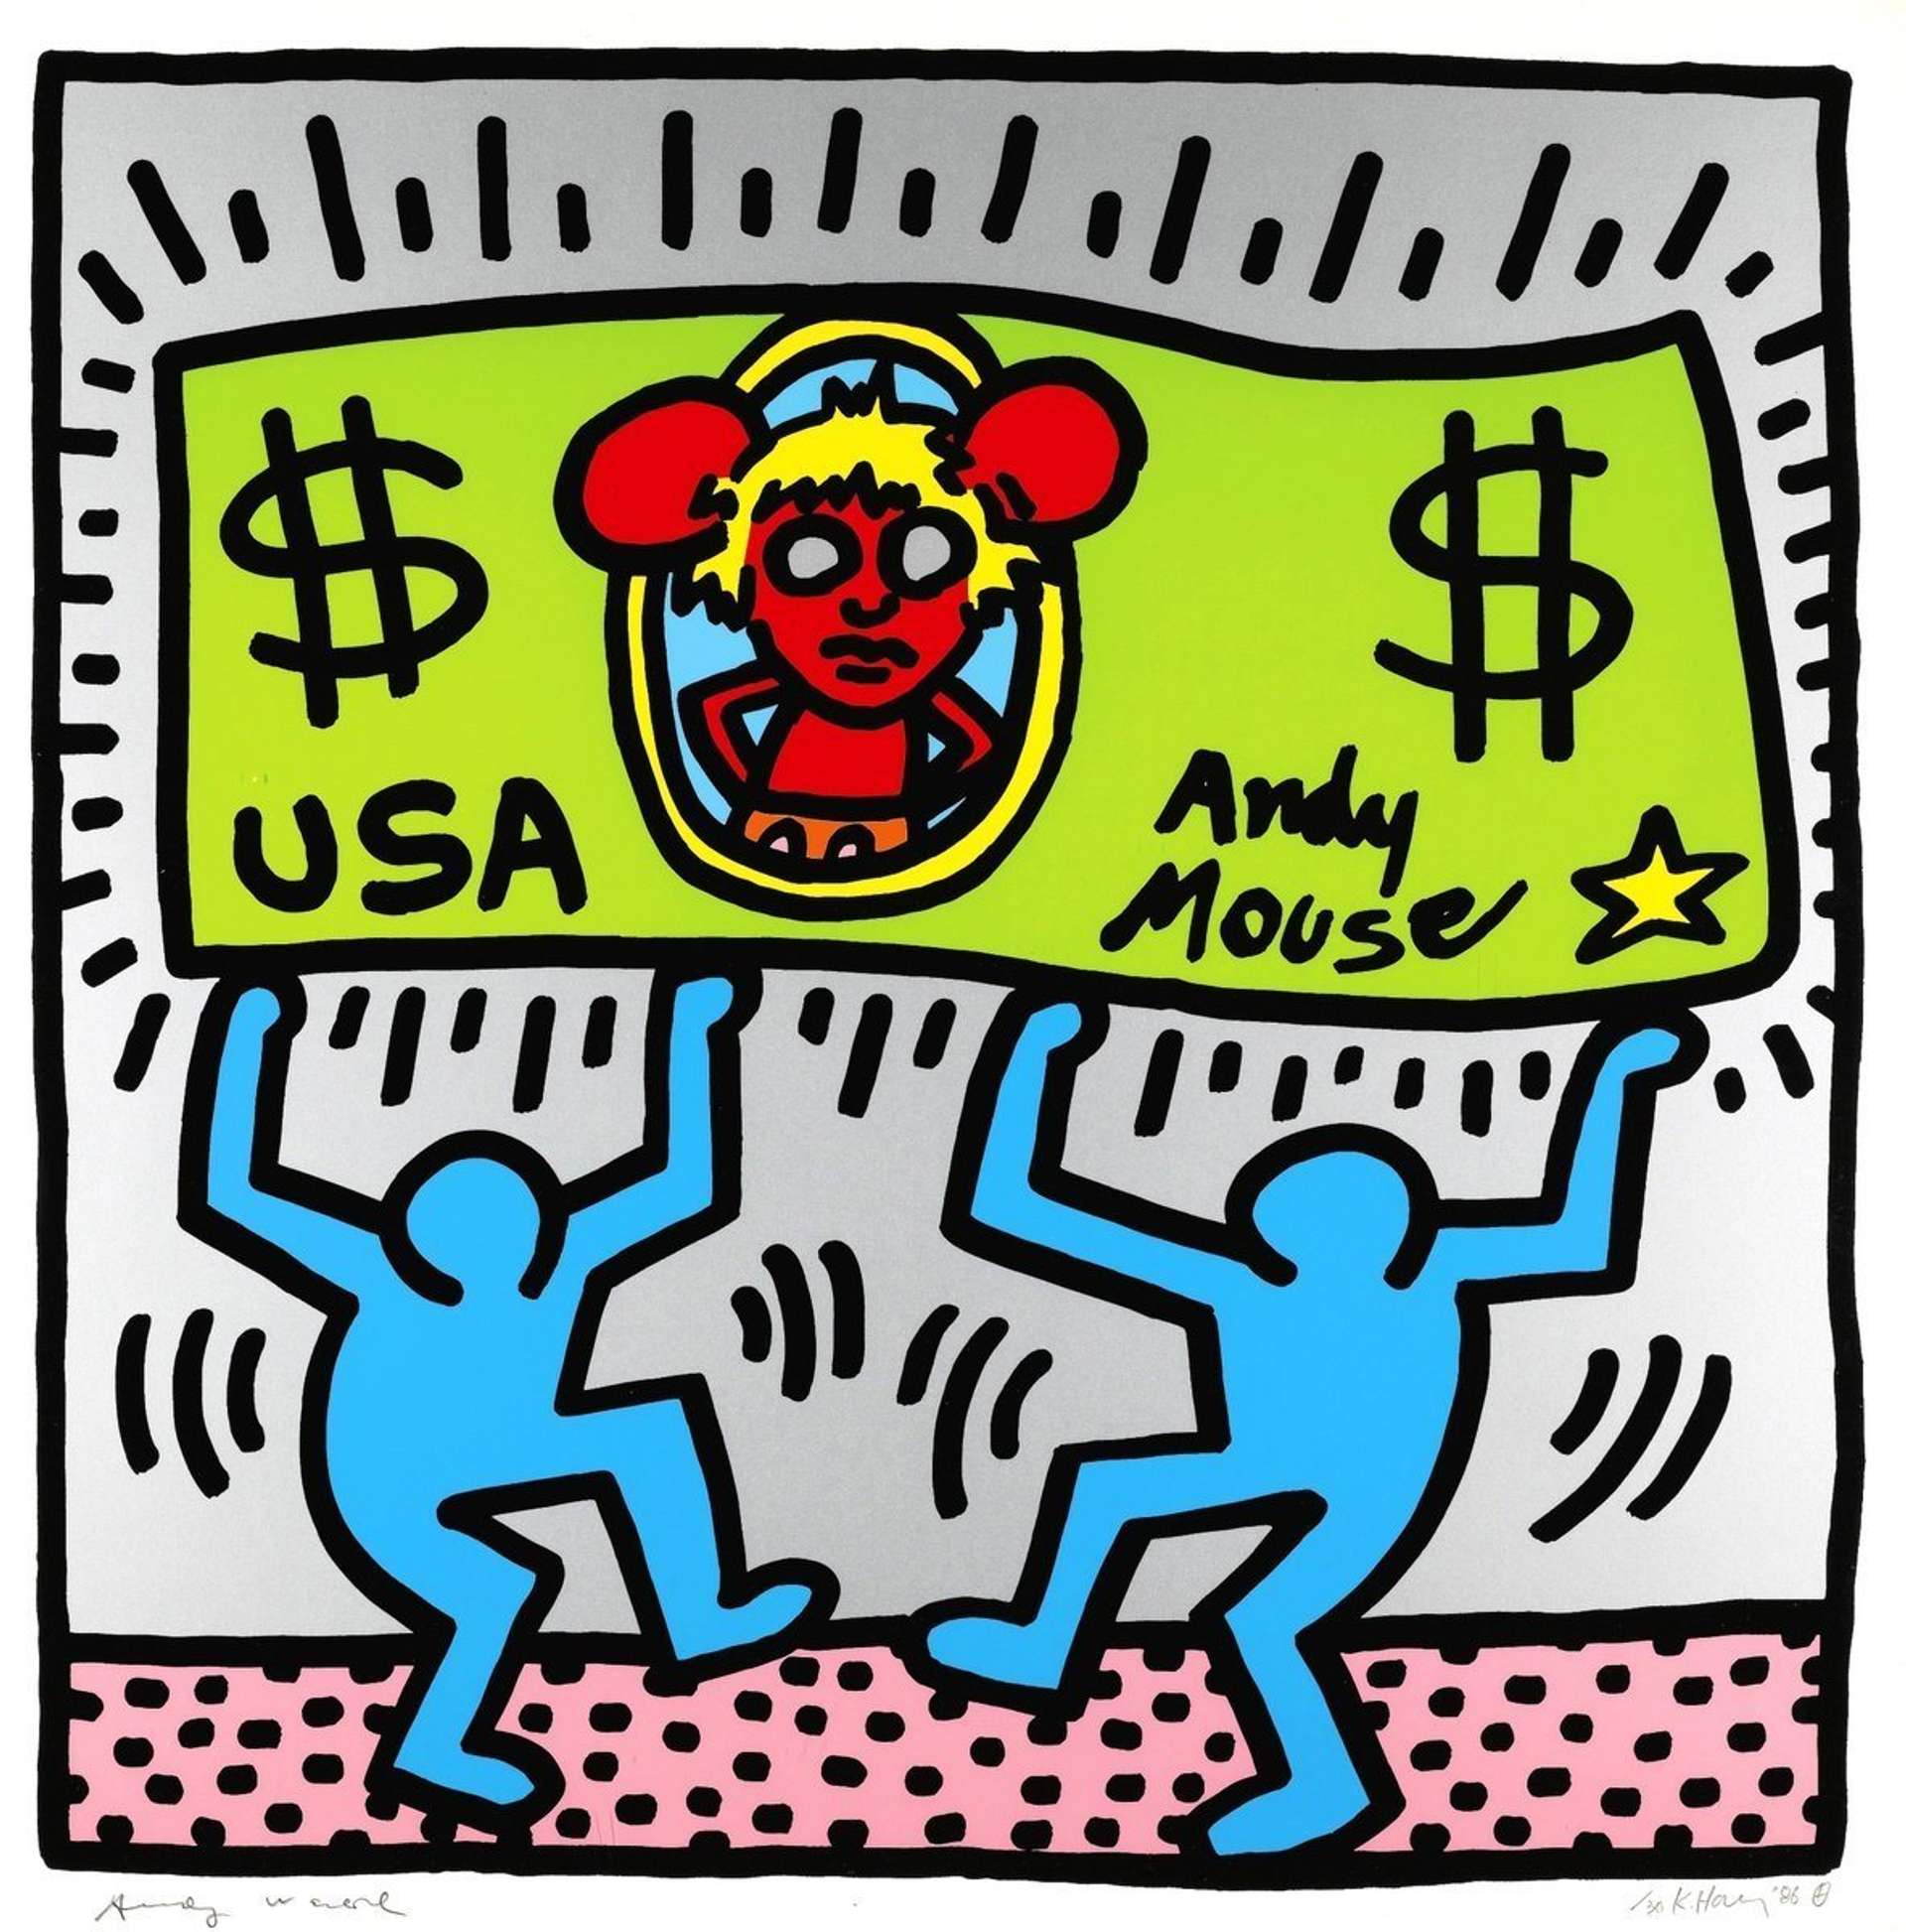 Andy Mouse 3 by Keith Haring